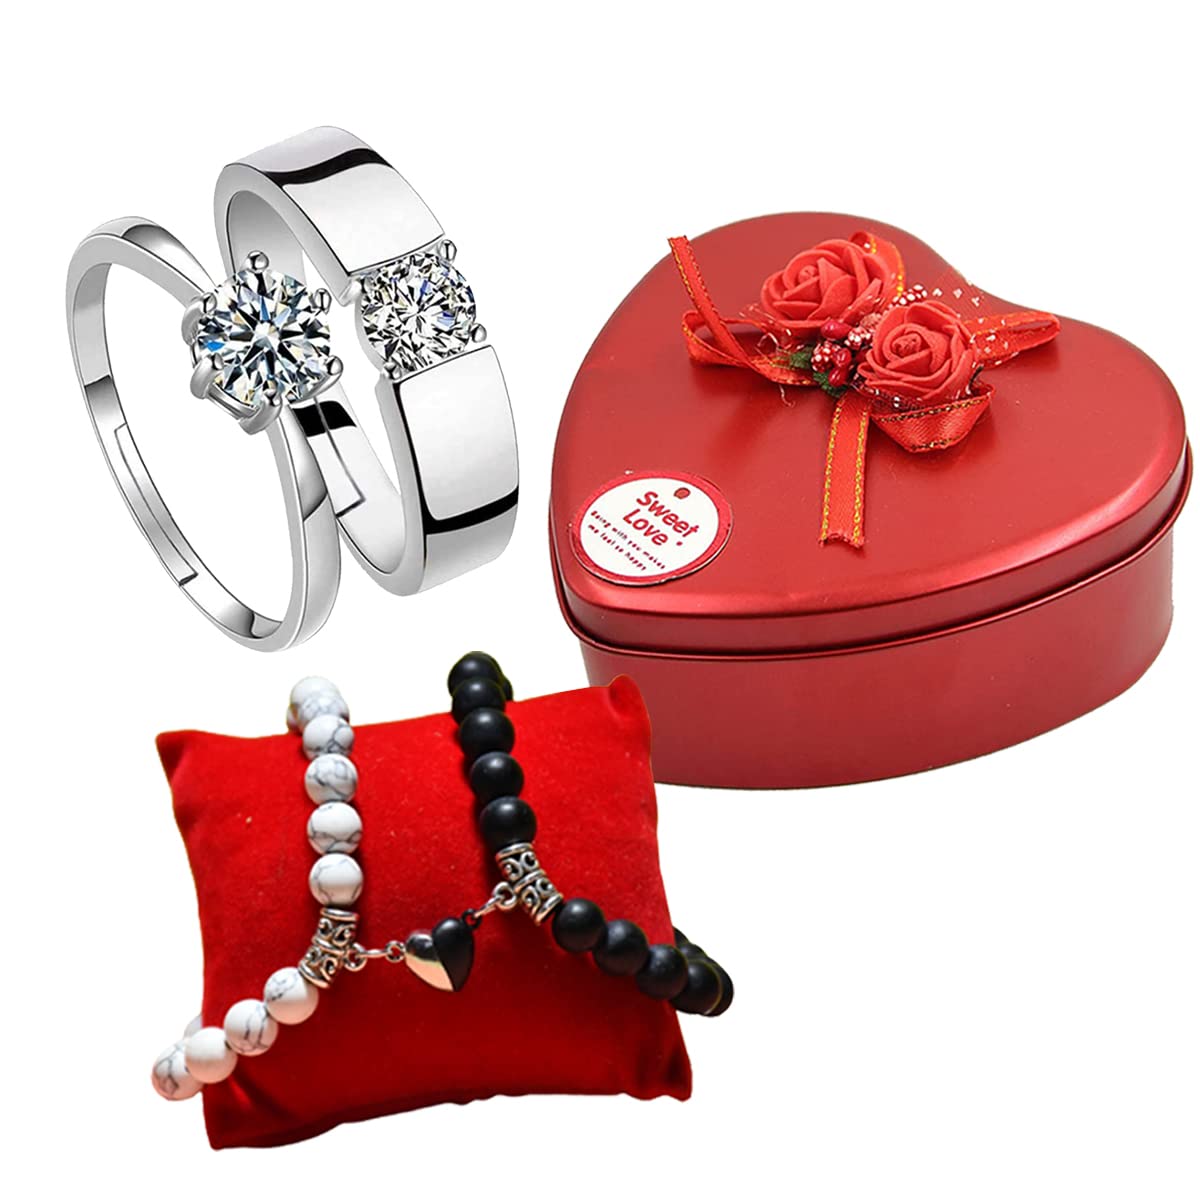 Order Online Best Surprise Gifts | Love Gifts | Romantic Gift and Get Up to  60% Off